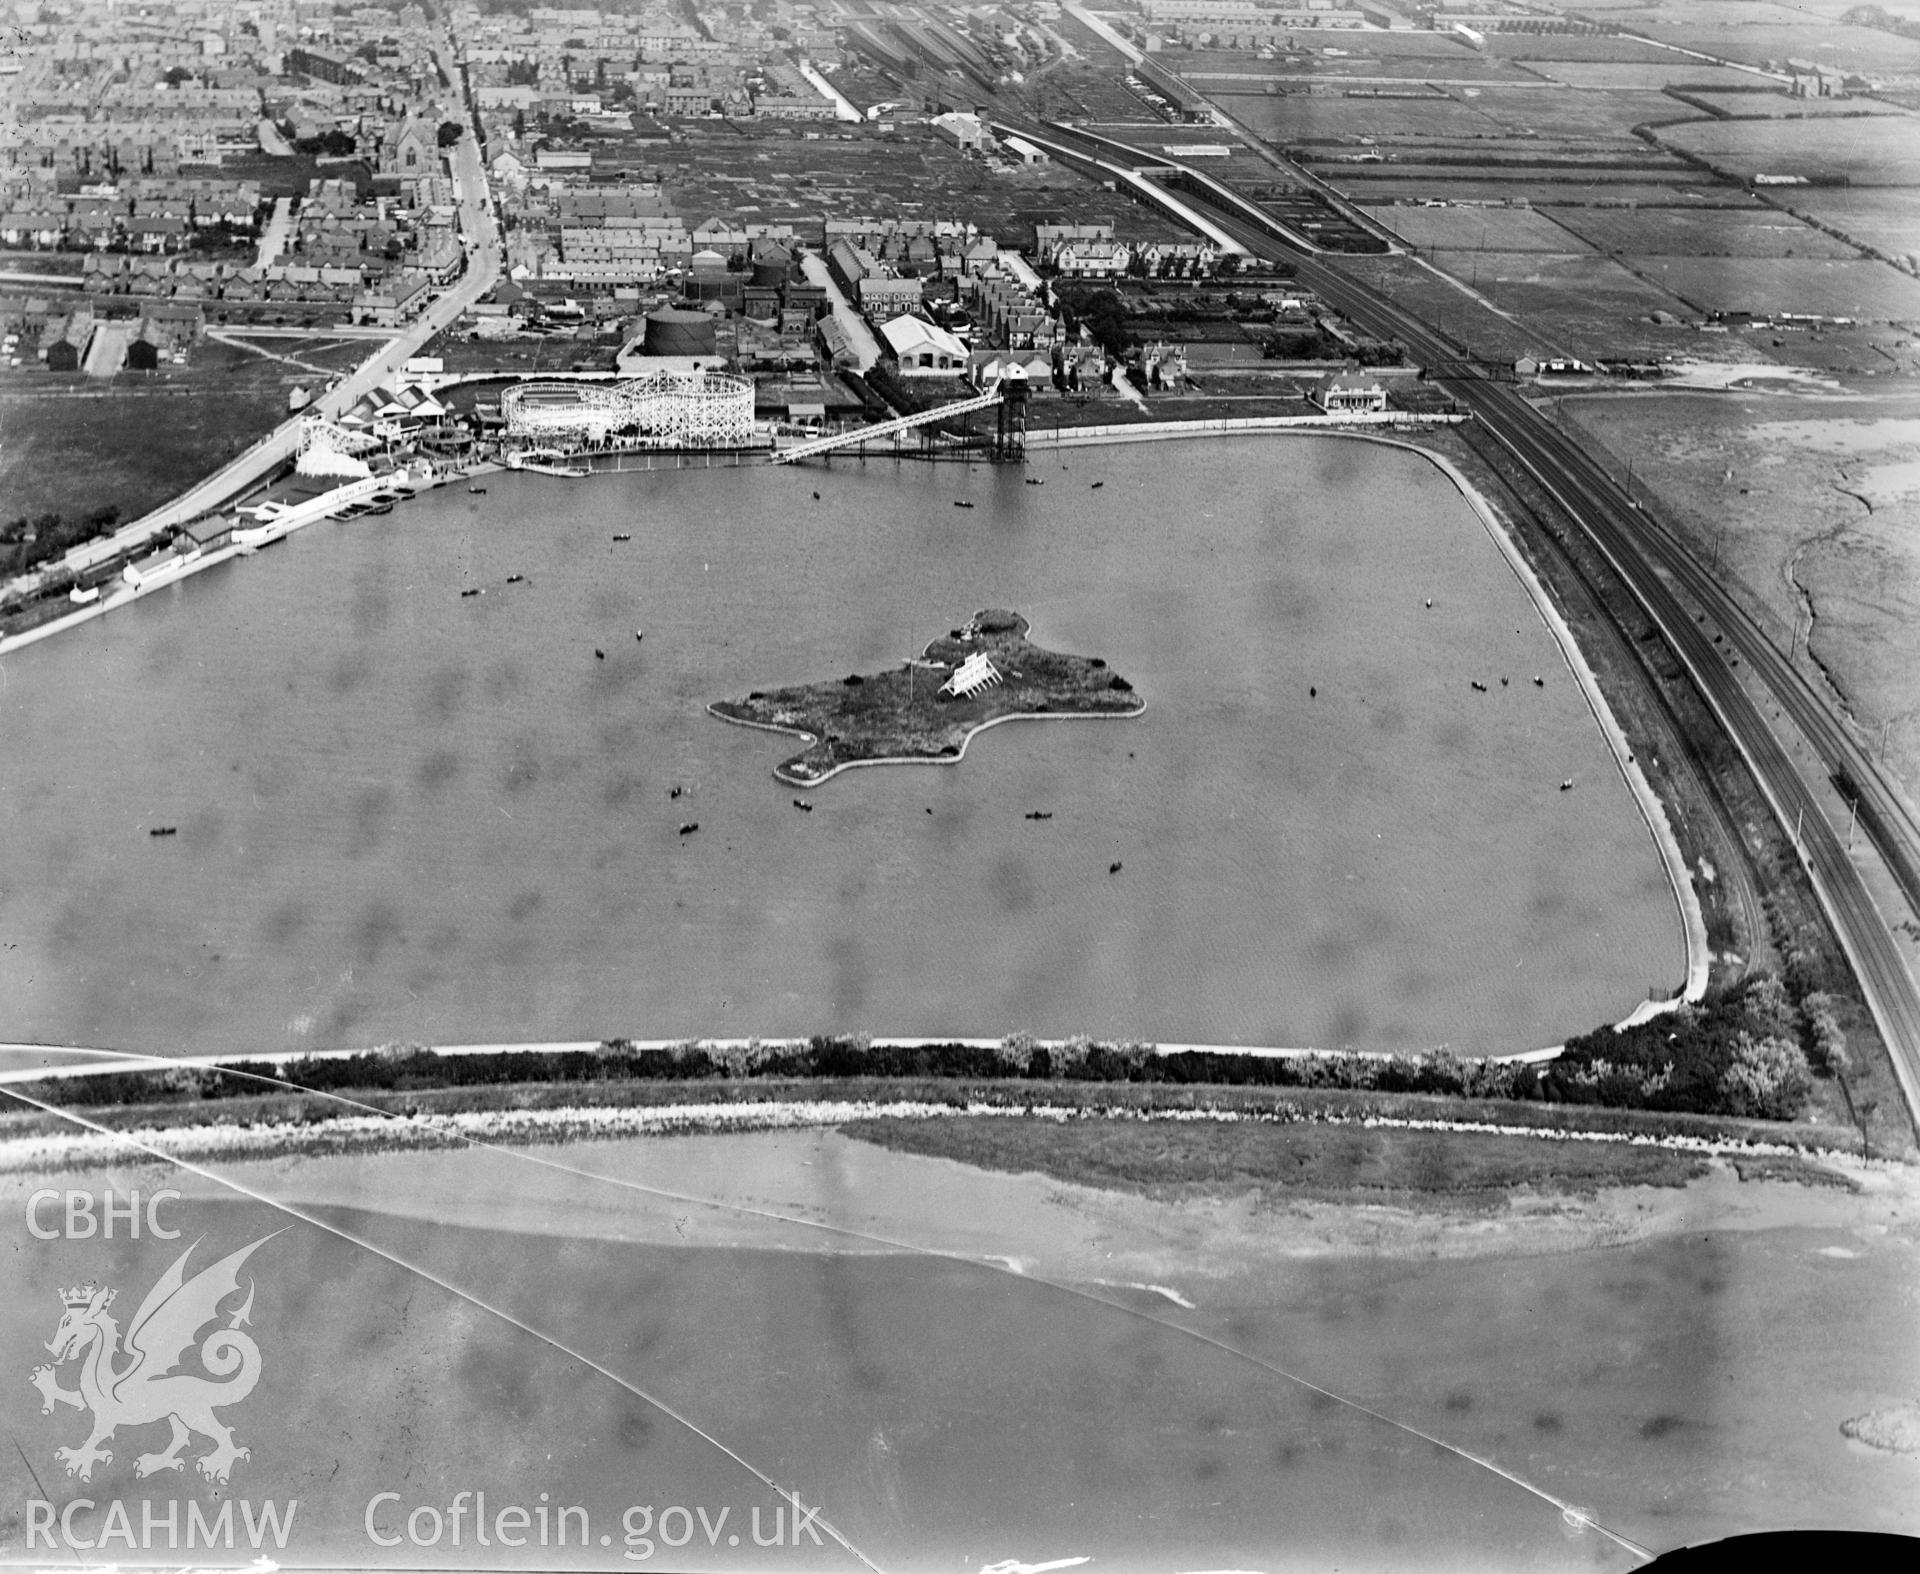 View of Rhyl showing the Marine Lake and Pleasure Park, oblique aerial view. 5?x4? black and white glass plate negative.